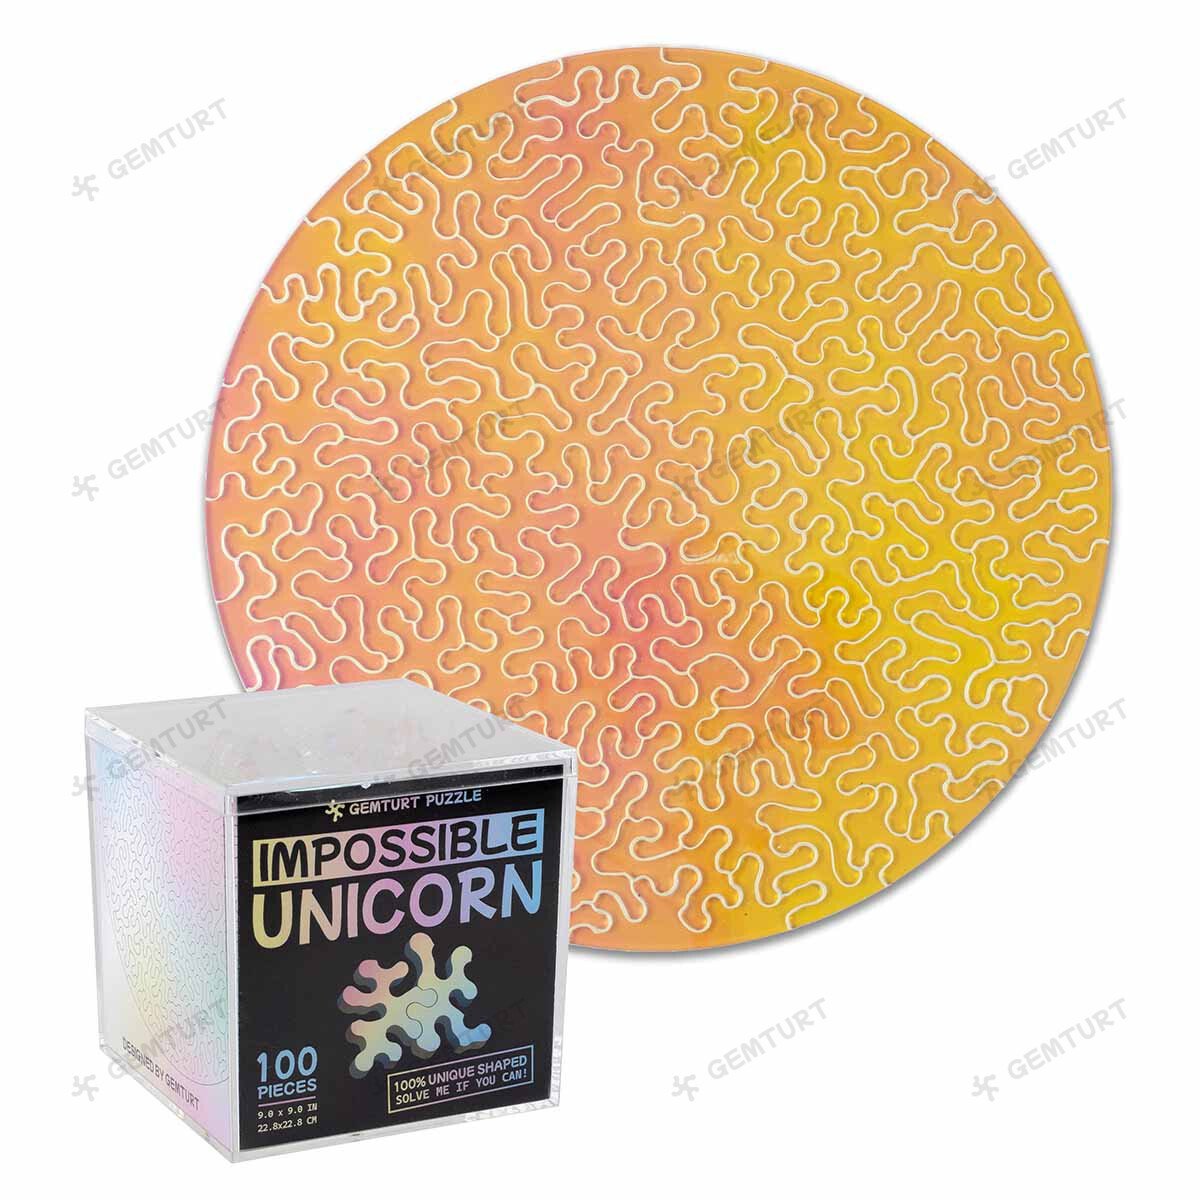 Impossible Unicorn - Round Unique Jigsaw Puzzle - Color Changing Iride